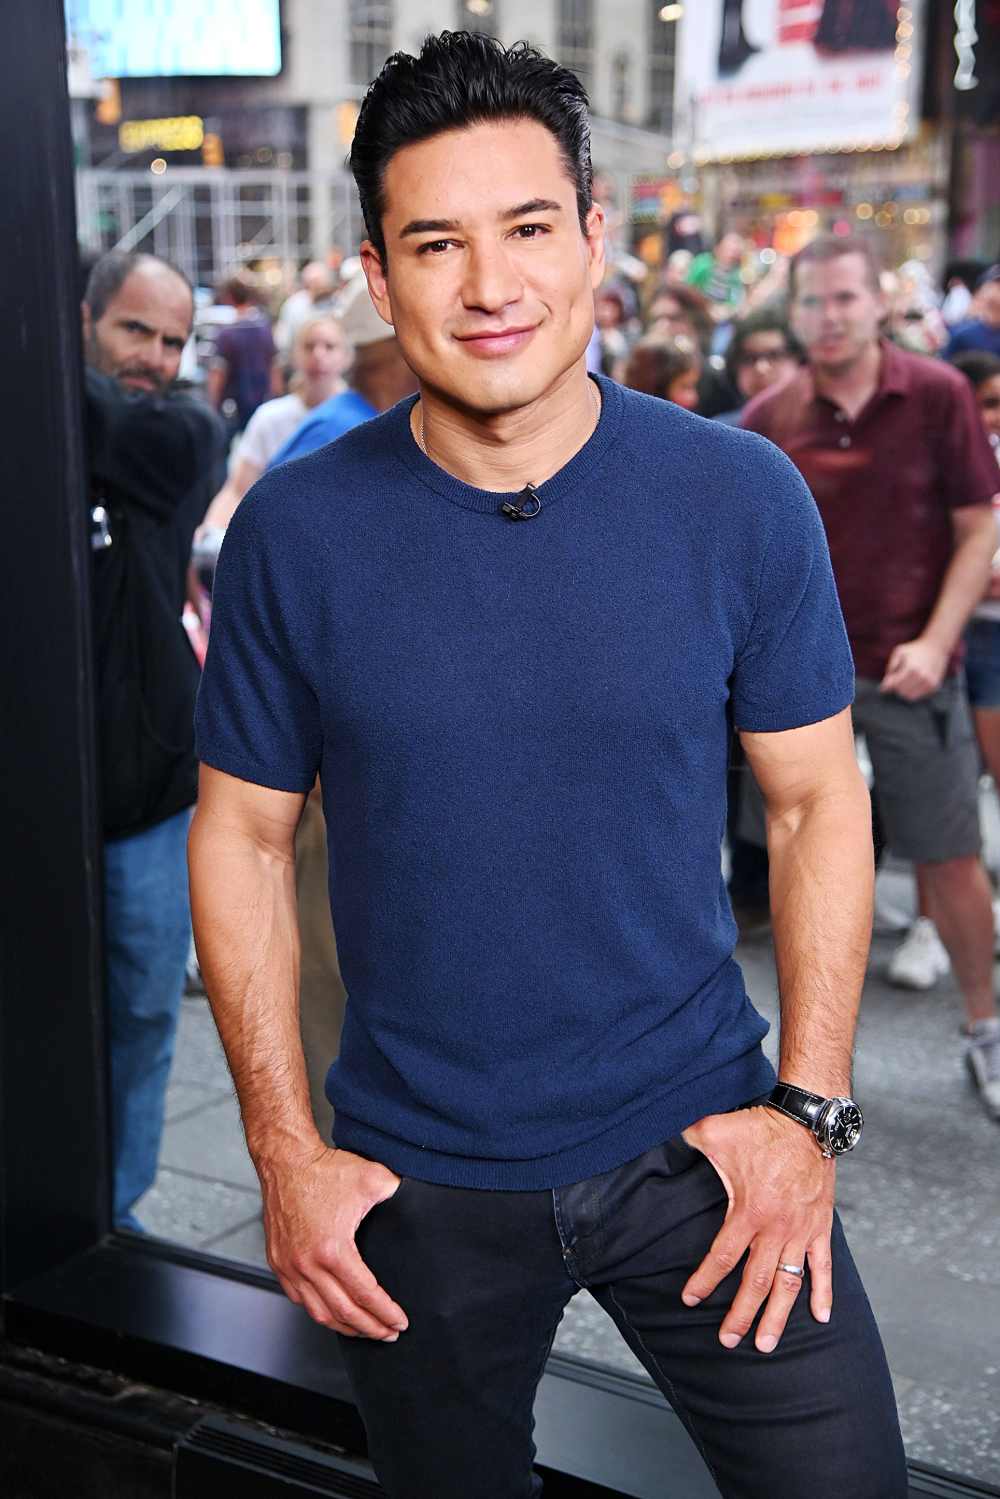 Mario Lopez My Remarks on Kids Transitioning Insensitive